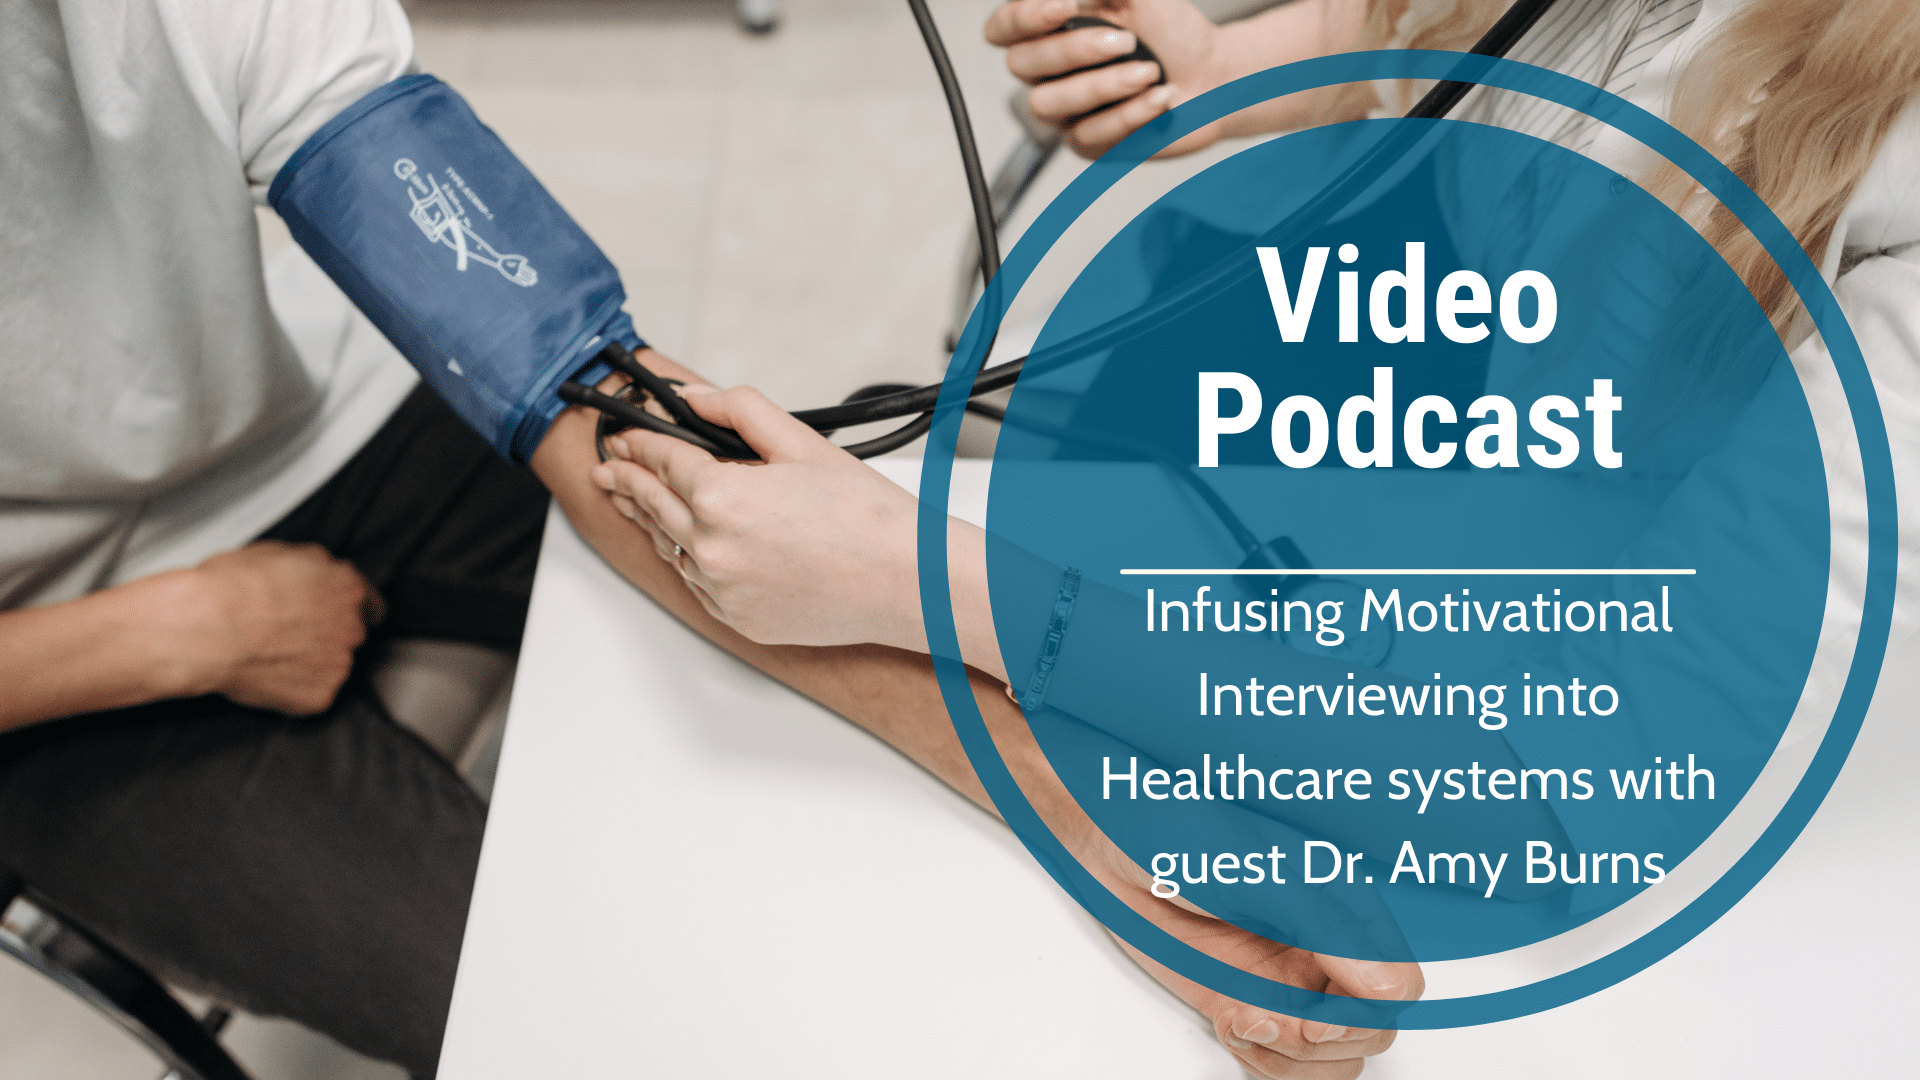 Infusing Motivational Interviewing into Healthcare systems with guest Dr. Amy Burns